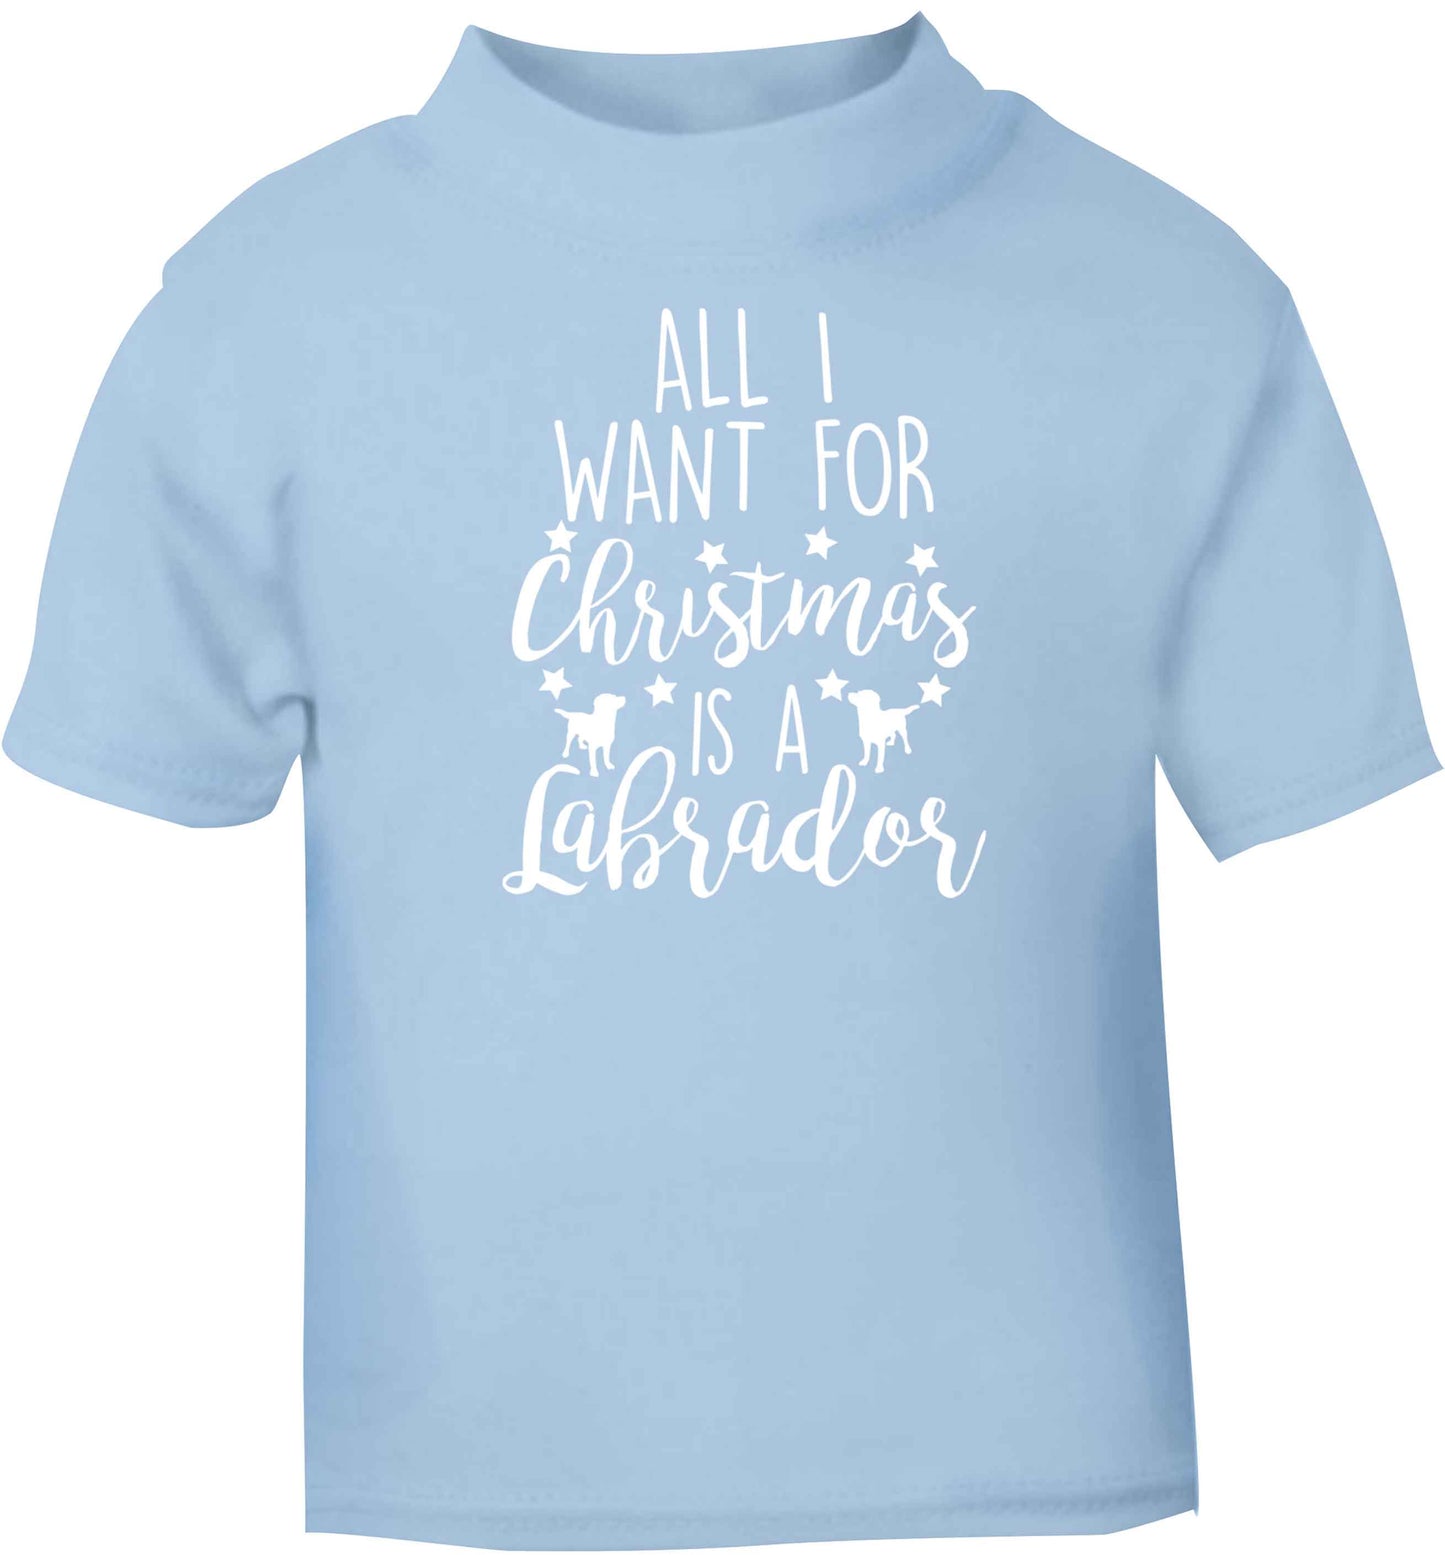 All I want for Christmas is a labrador light blue baby toddler Tshirt 2 Years